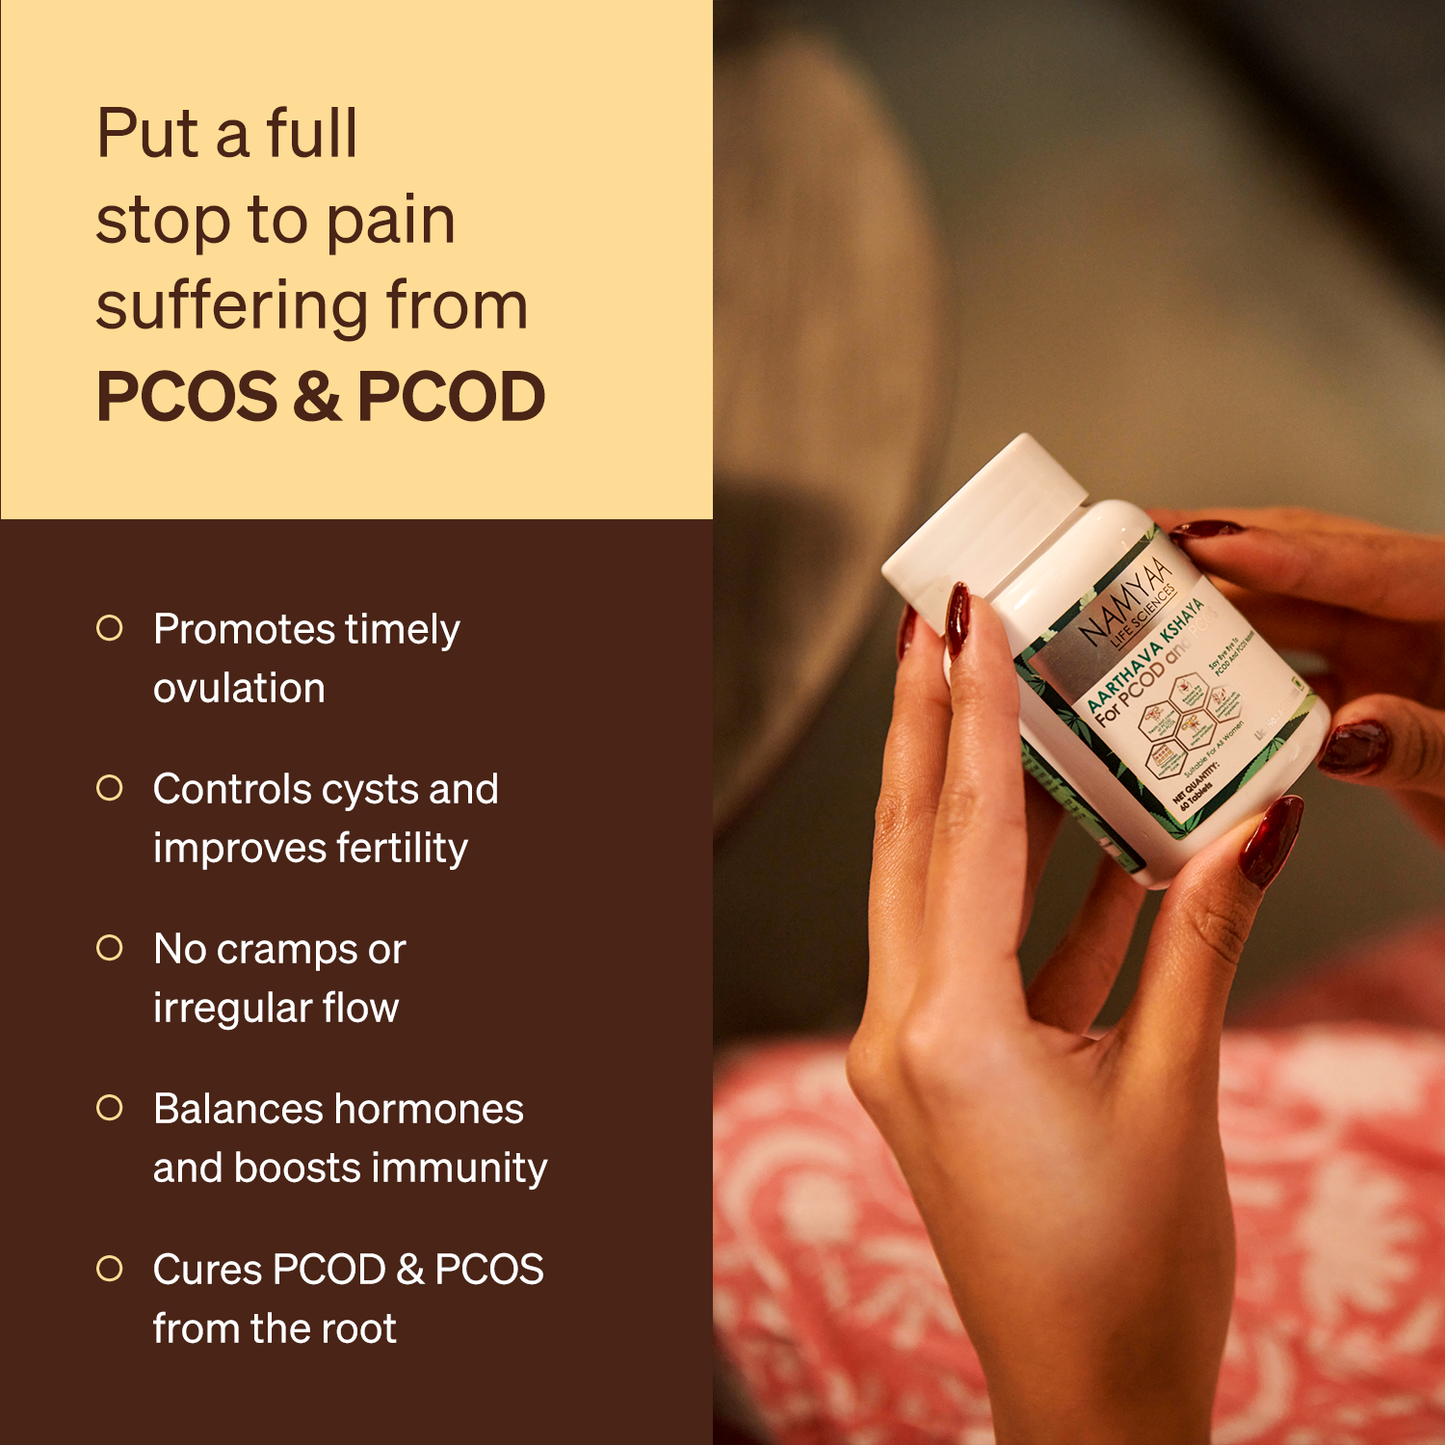 Aarthava Kshaya PCOD and PCOS Tablets